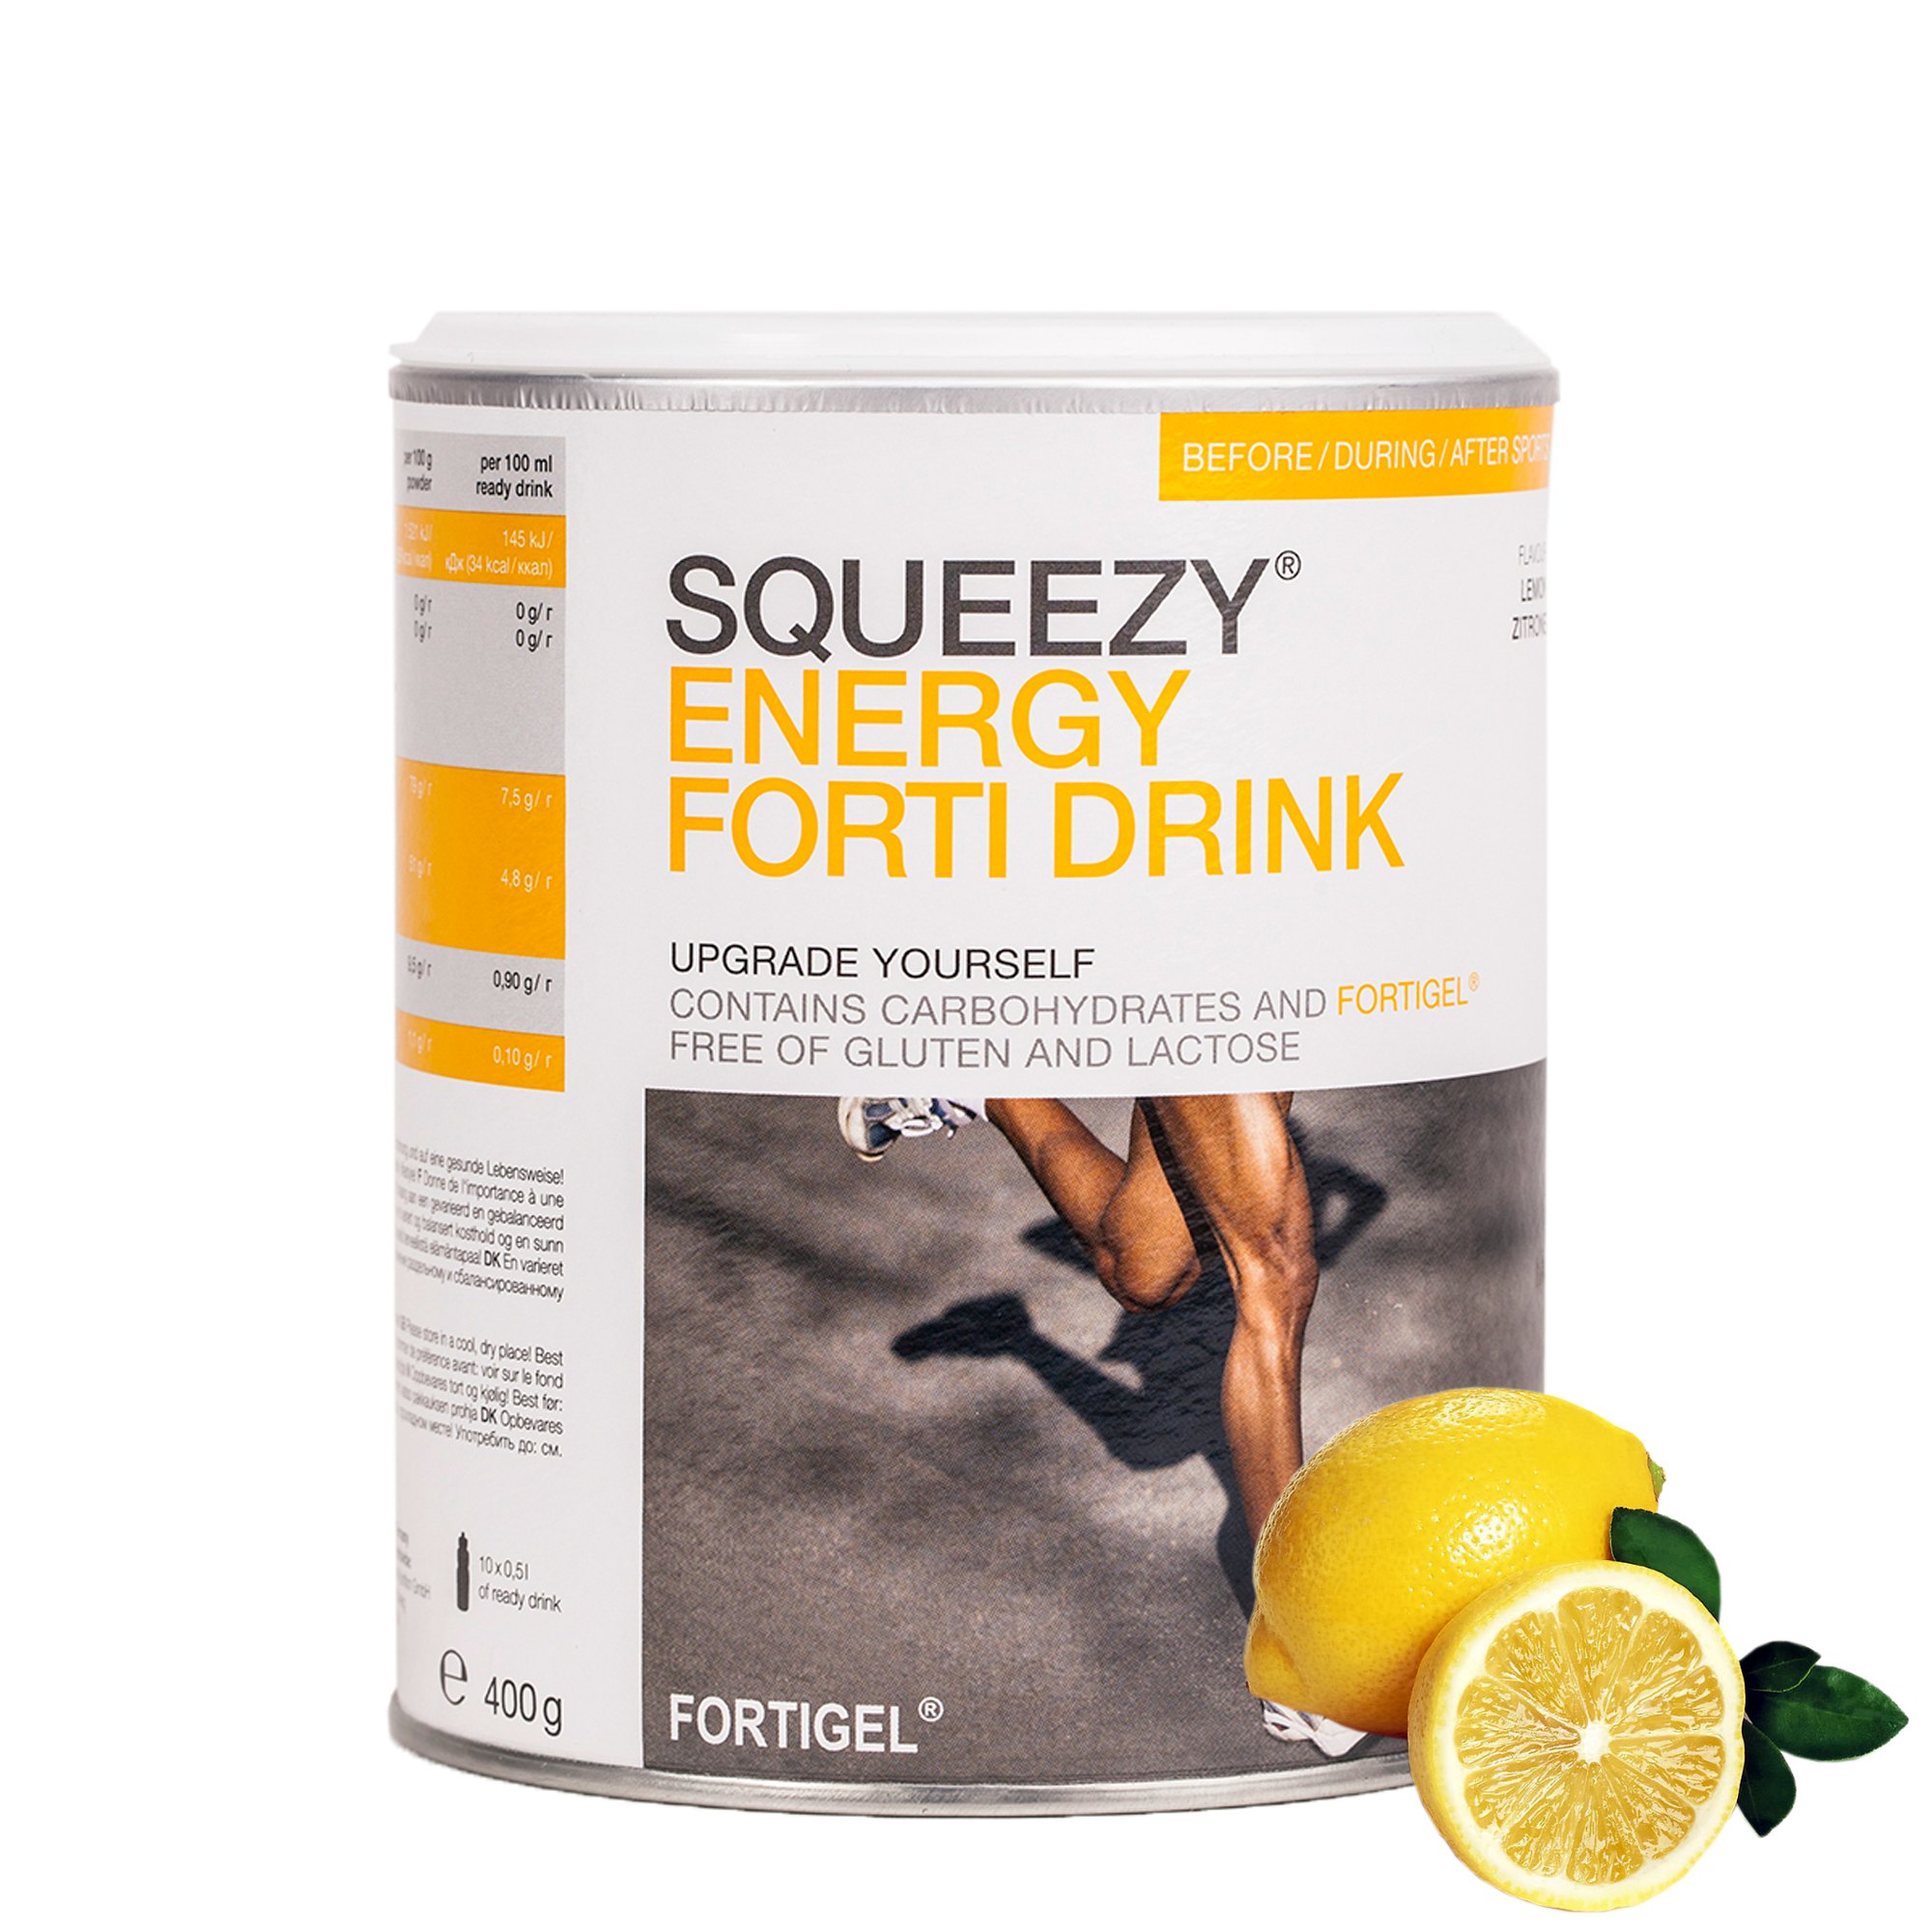 ENERGY FORTI DRINK